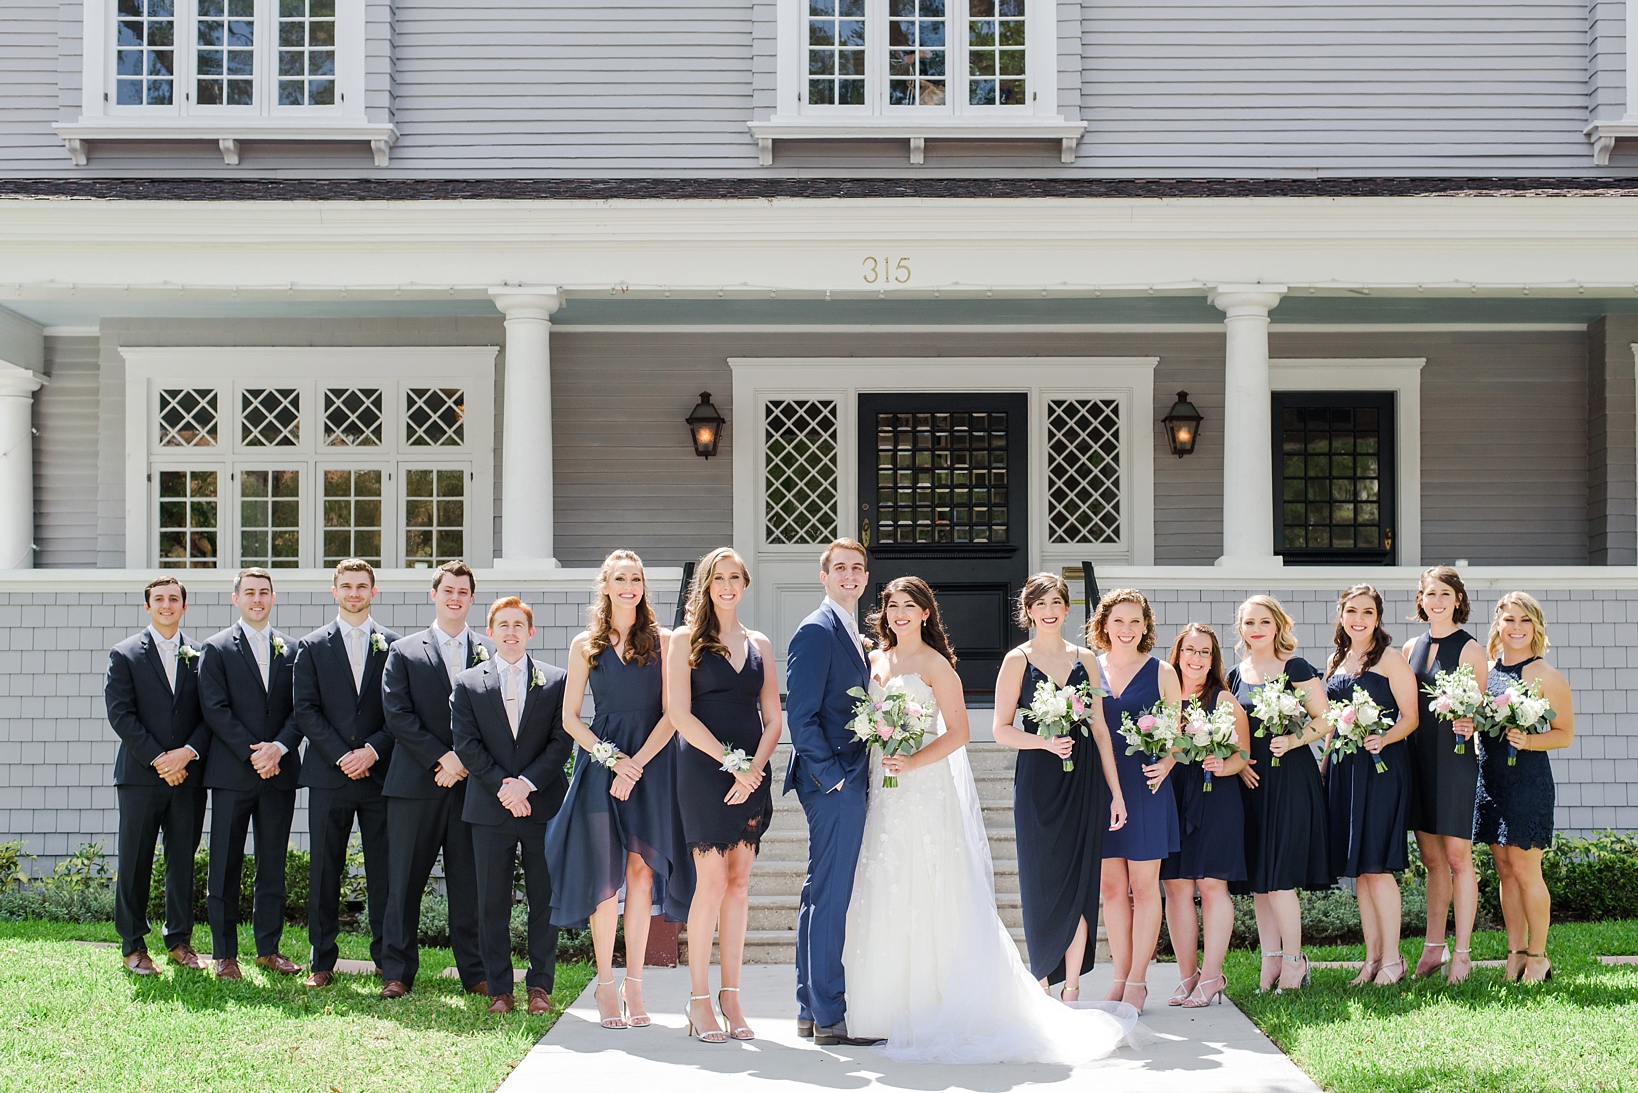 The entire wedding party in front of the Orlo in Tampa, Florida